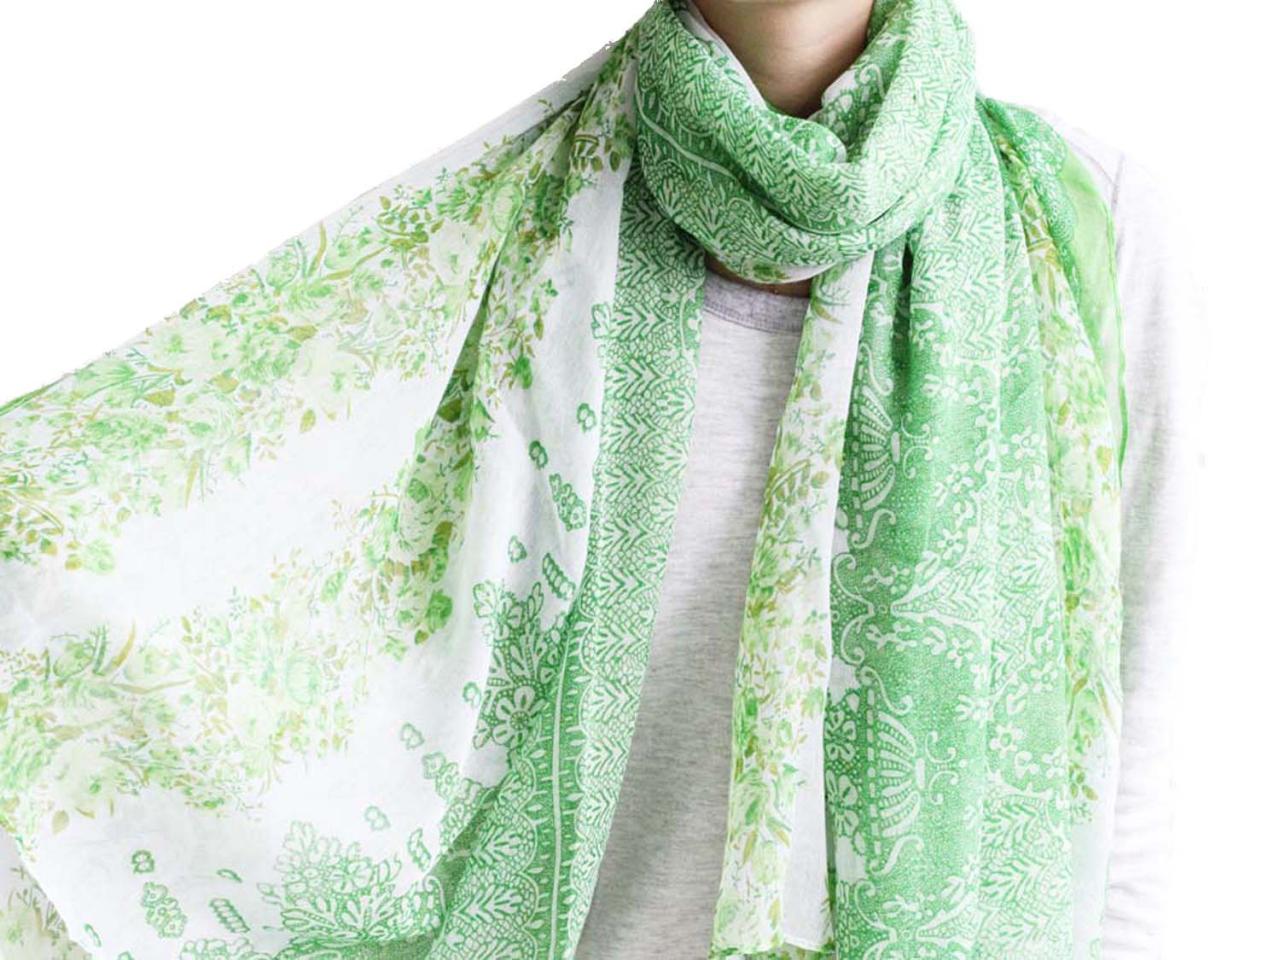 Bright Green Sheer Cotton Floral Scarf Shawl Wrap Spring Summer Oversize Scarves